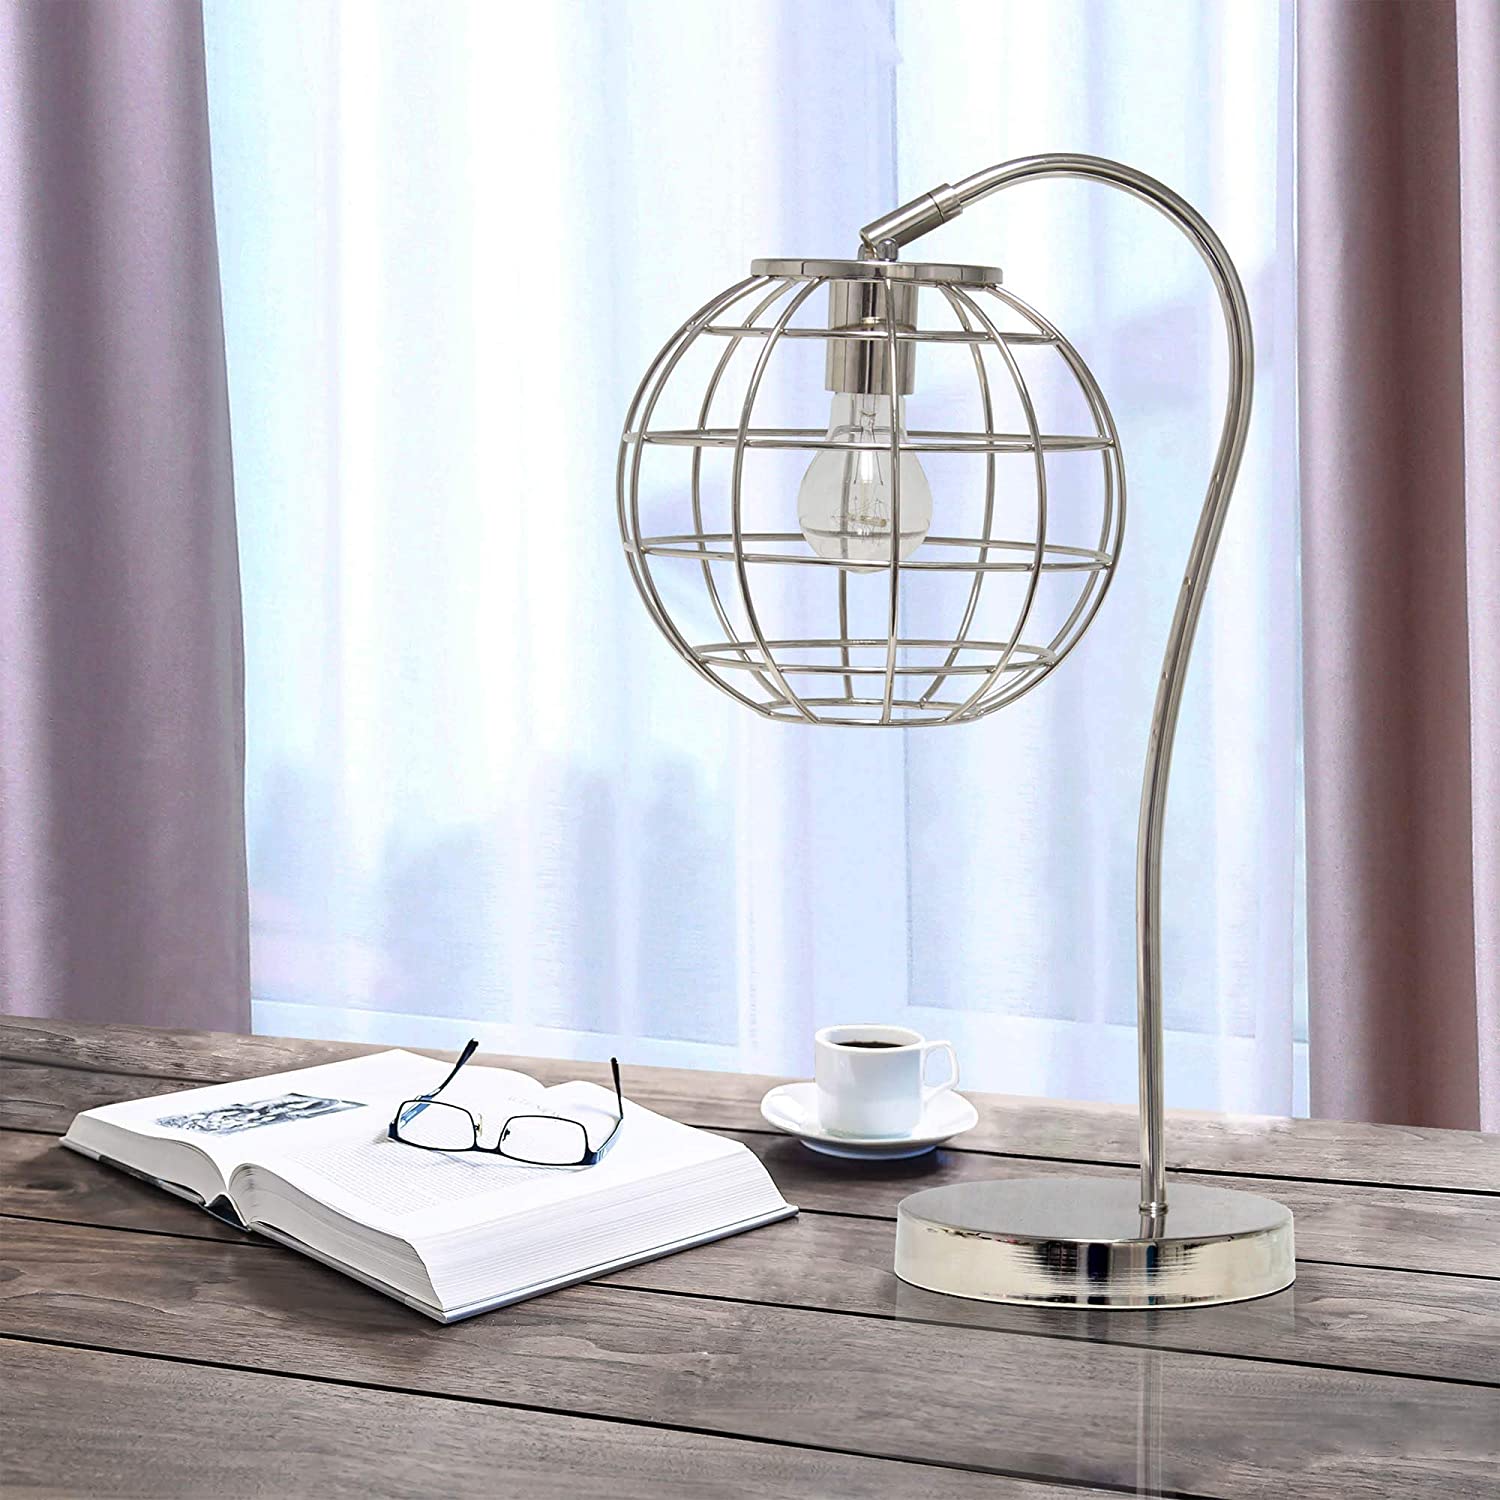 Lalia Home Decorative Arched Metal Cage Table Lamp, Chrome